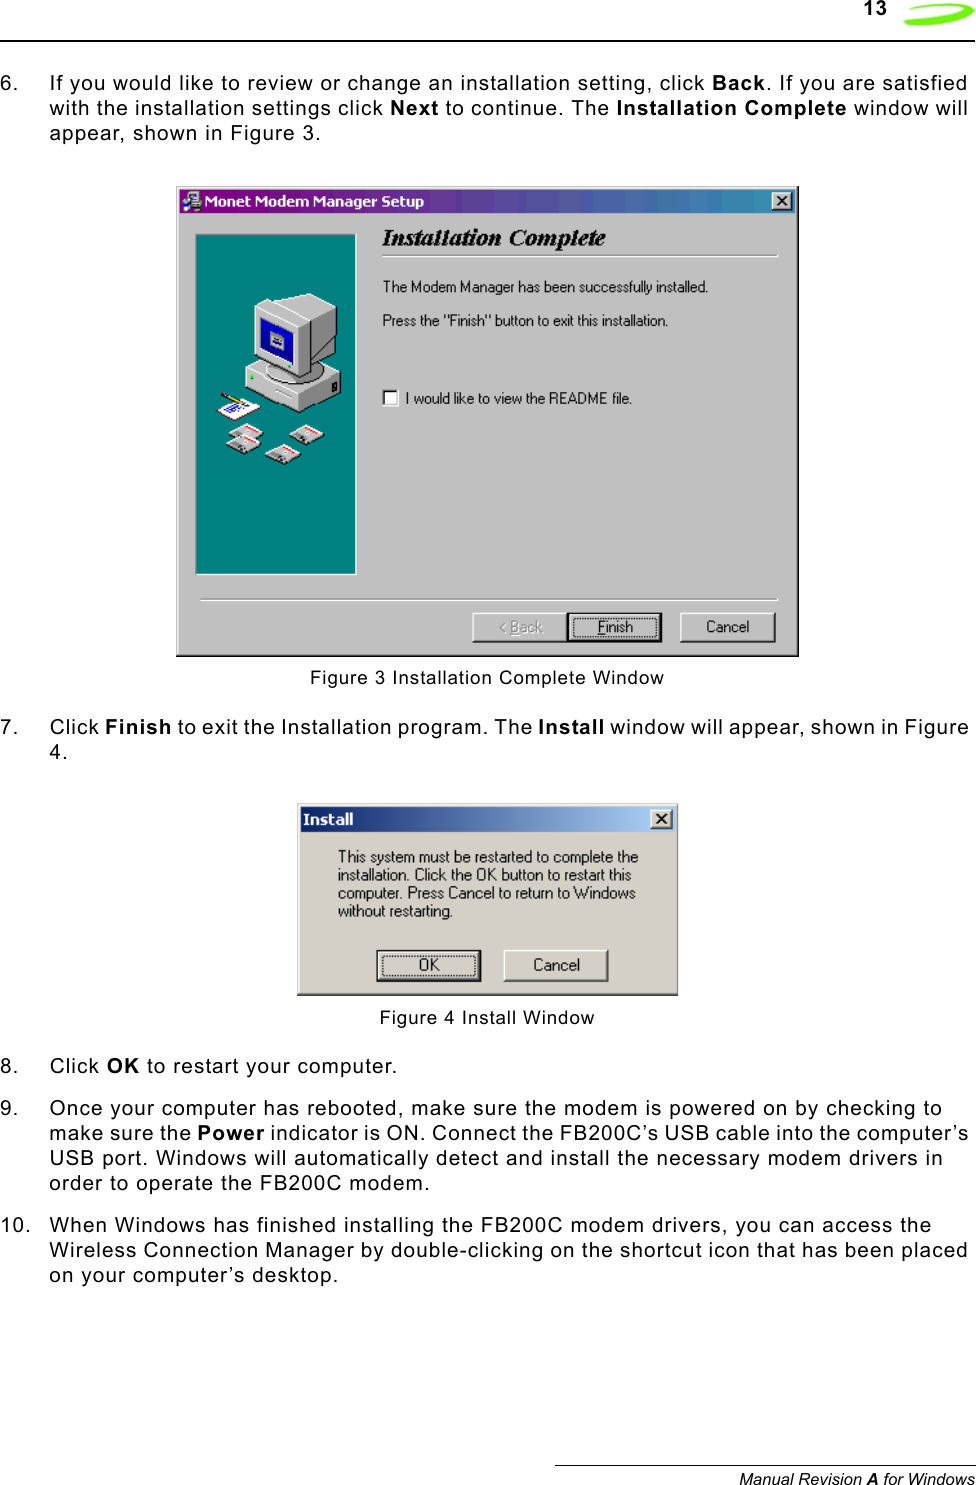    13Manual Revision A for Windows6. If you would like to review or change an installation setting, click Back. If you are satisfied with the installation settings click Next to continue. The Installation Complete window will appear, shown in Figure 3.Figure 3 Installation Complete Window7. Click Finish to exit the Installation program. The Install window will appear, shown in Figure 4.Figure 4 Install Window8. Click OK to restart your computer.9. Once your computer has rebooted, make sure the modem is powered on by checking to make sure the Power indicator is ON. Connect the FB200C’s USB cable into the computer’s USB port. Windows will automatically detect and install the necessary modem drivers in order to operate the FB200C modem. 10. When Windows has finished installing the FB200C modem drivers, you can access the Wireless Connection Manager by double-clicking on the shortcut icon that has been placed on your computer’s desktop.